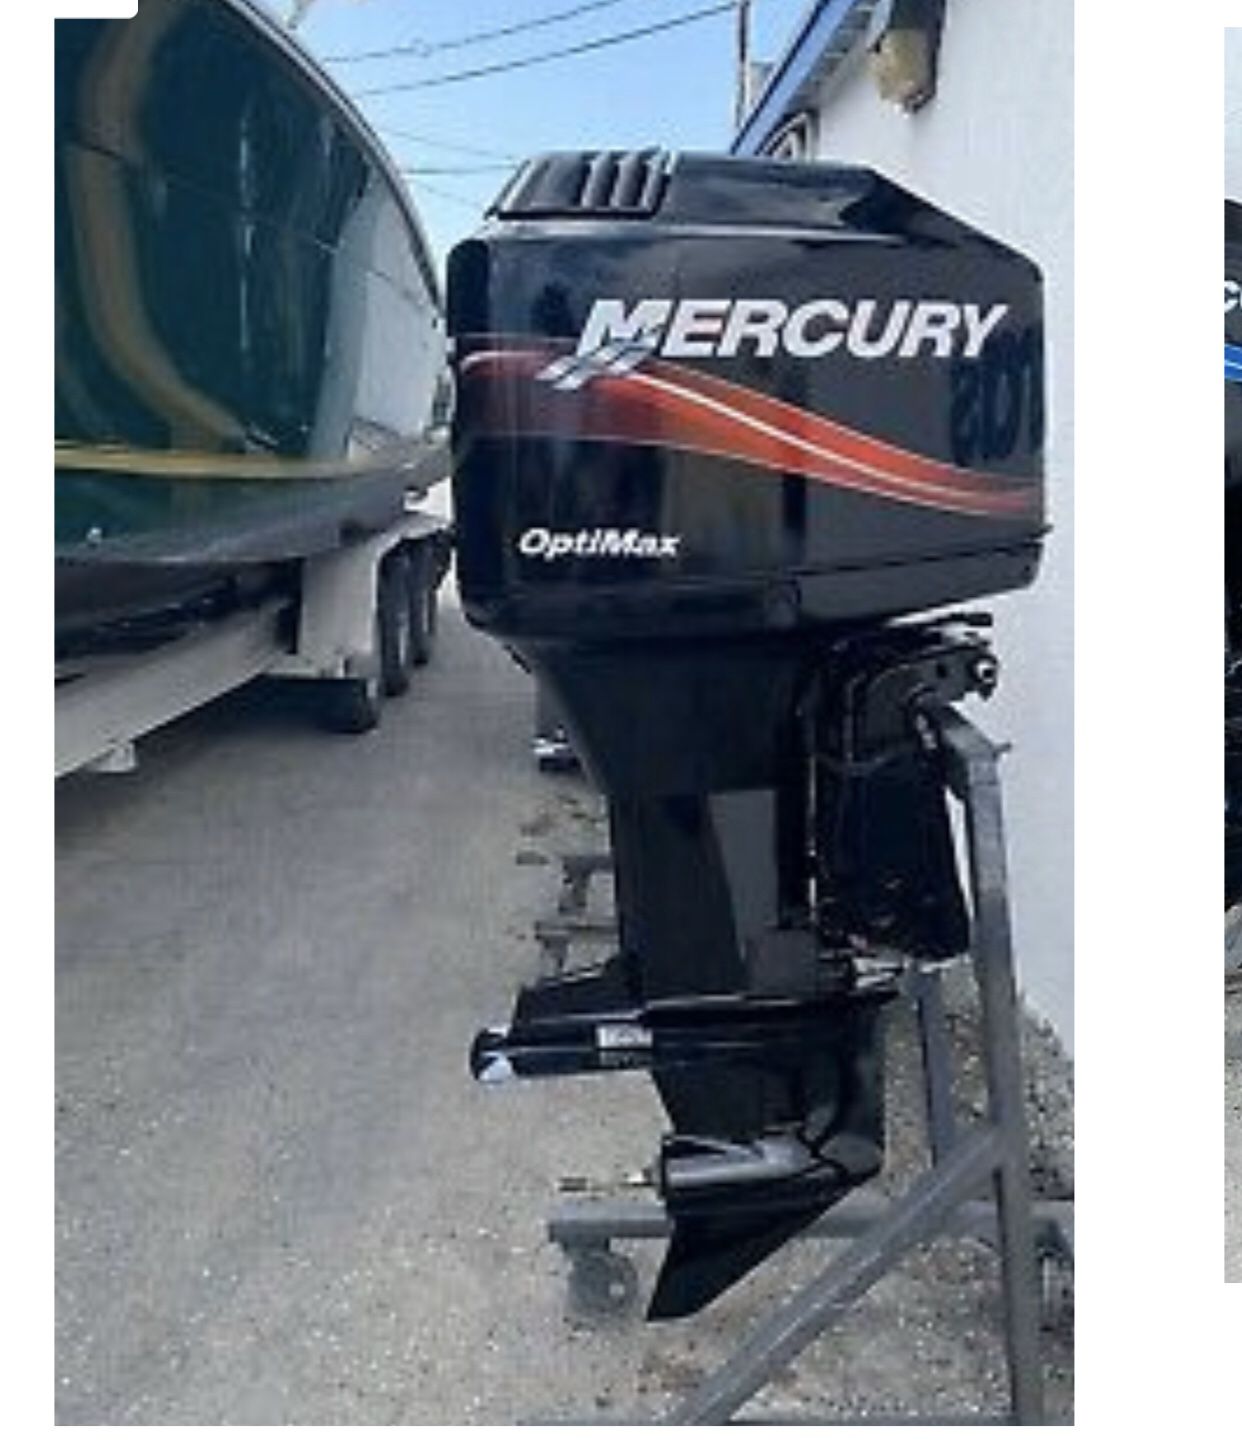 2001 135 HP MERCURY OUTBOARD MOTOR WITH 20" SHAFT A FUEL EFFICIENT POWERHOUSE ! THIS IS A DIRECT FUEL INJECTED OUTBOARD WITH POWER TRIM AND TILT.